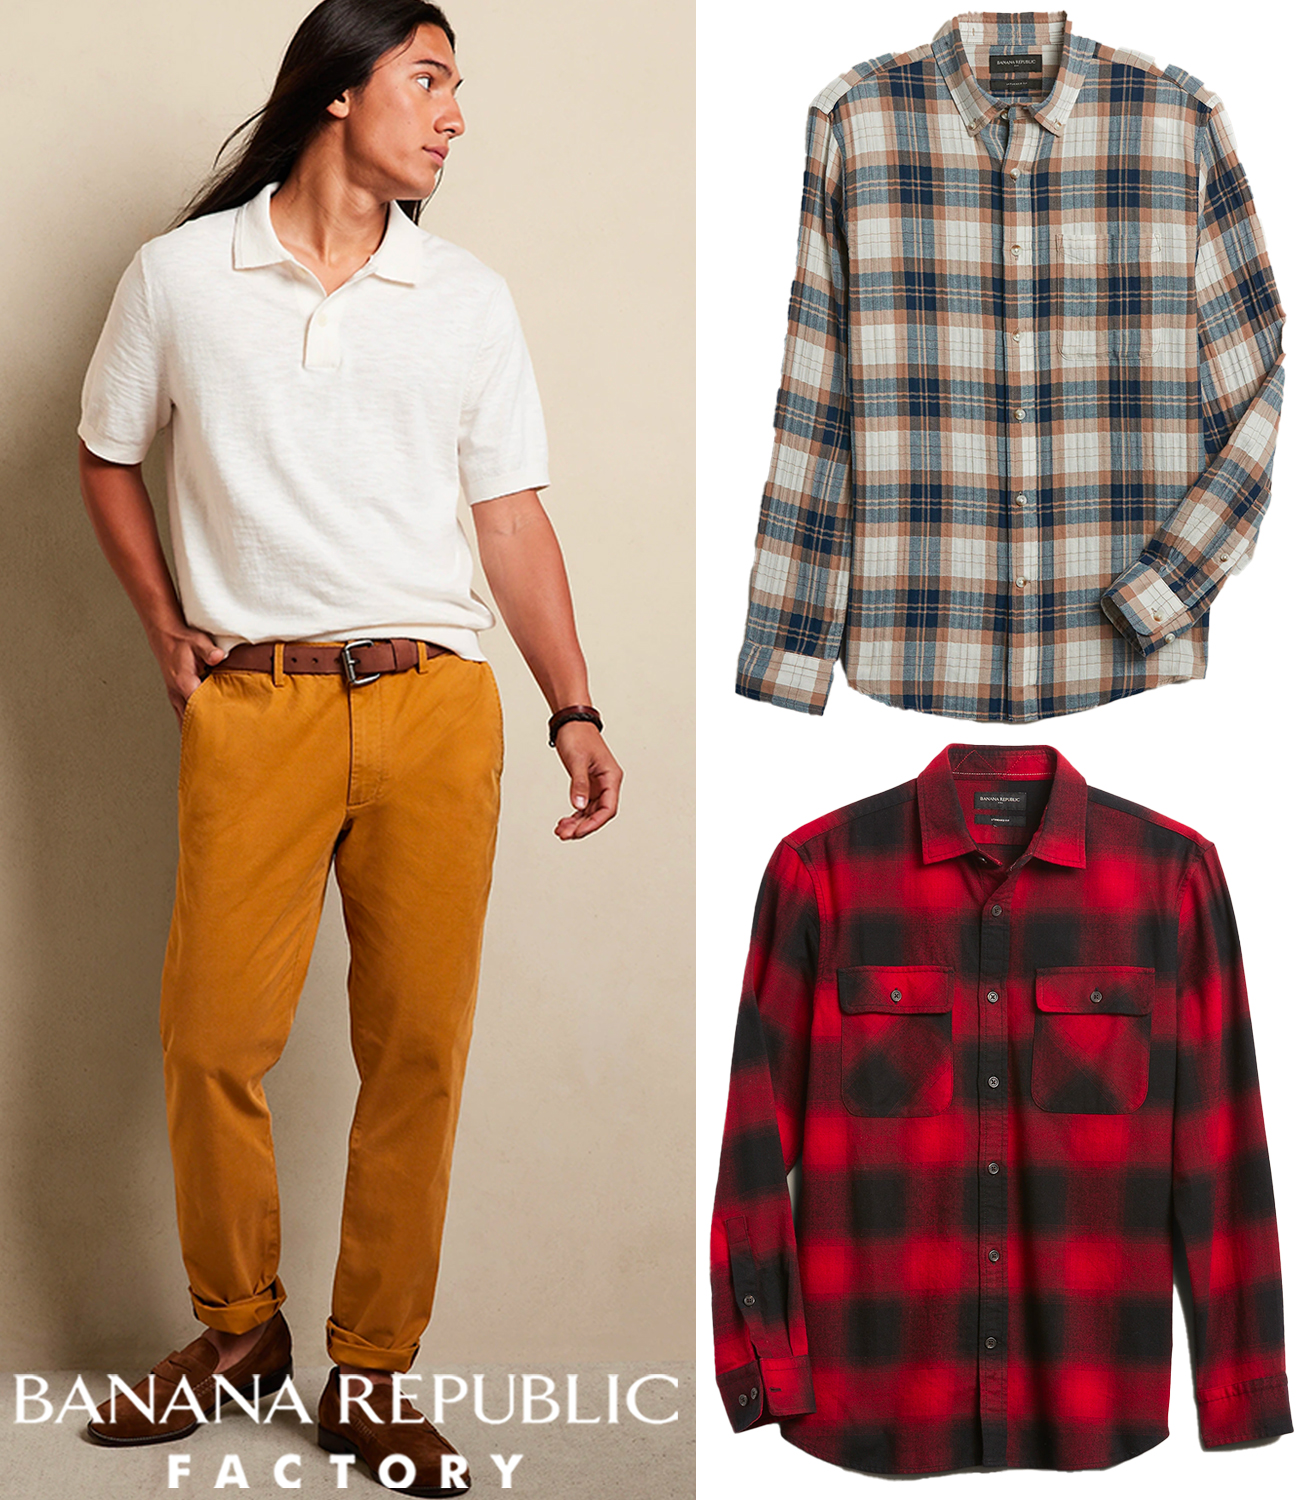 BR Factory Men's Shirts (Crinkle, Untucked Textured Flannel) $15.60, Lived-Chinos (Skinny, Athletic-Fit, Straight, select colors) $16.80 + FS on $40+